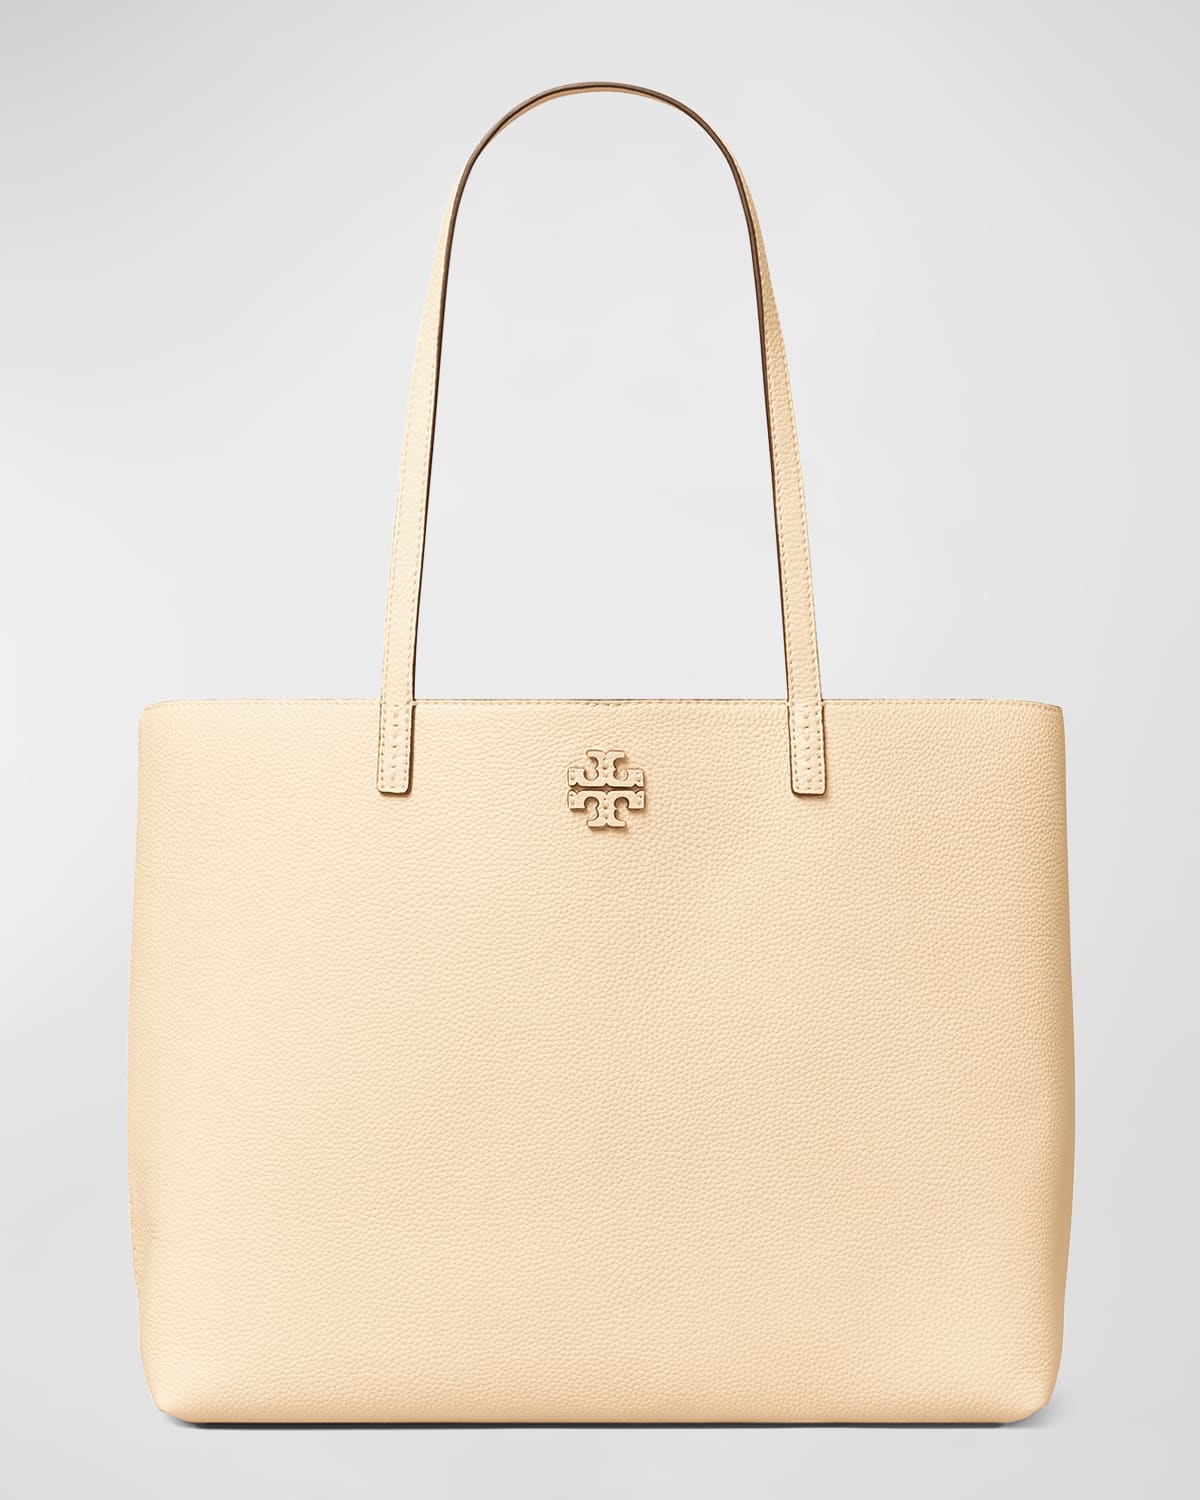 Tory Burch Mcgraw Leather Tote Bag In Brie